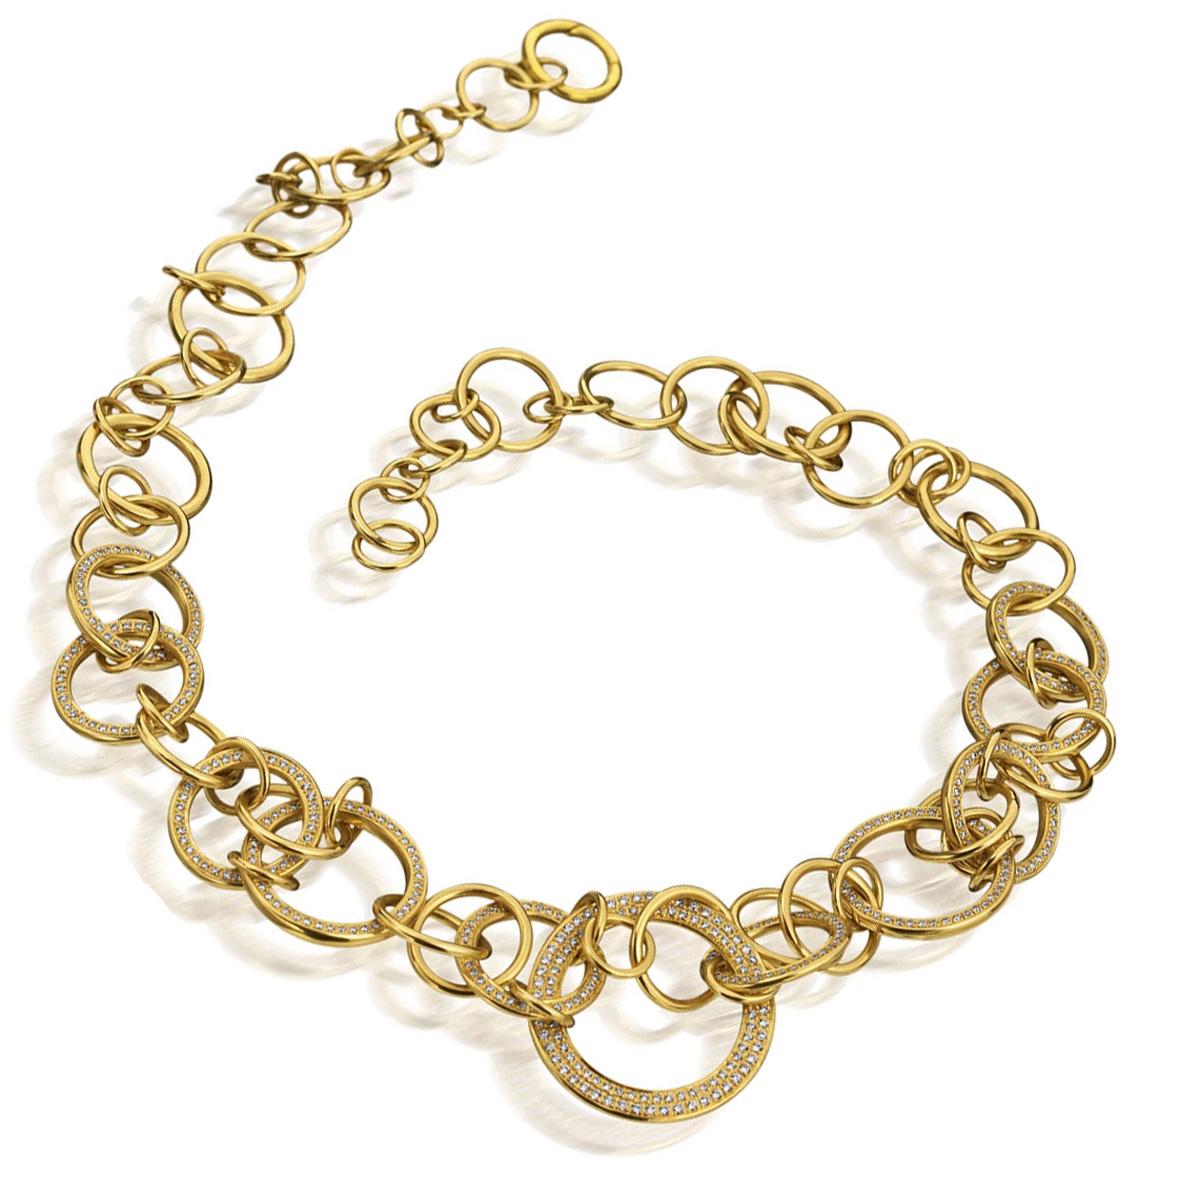 A fabulous Di Modolo diamond necklace featuring intertwined 18k yellow gold circles set with round brilliant cut diamonds. The necklace measures 17